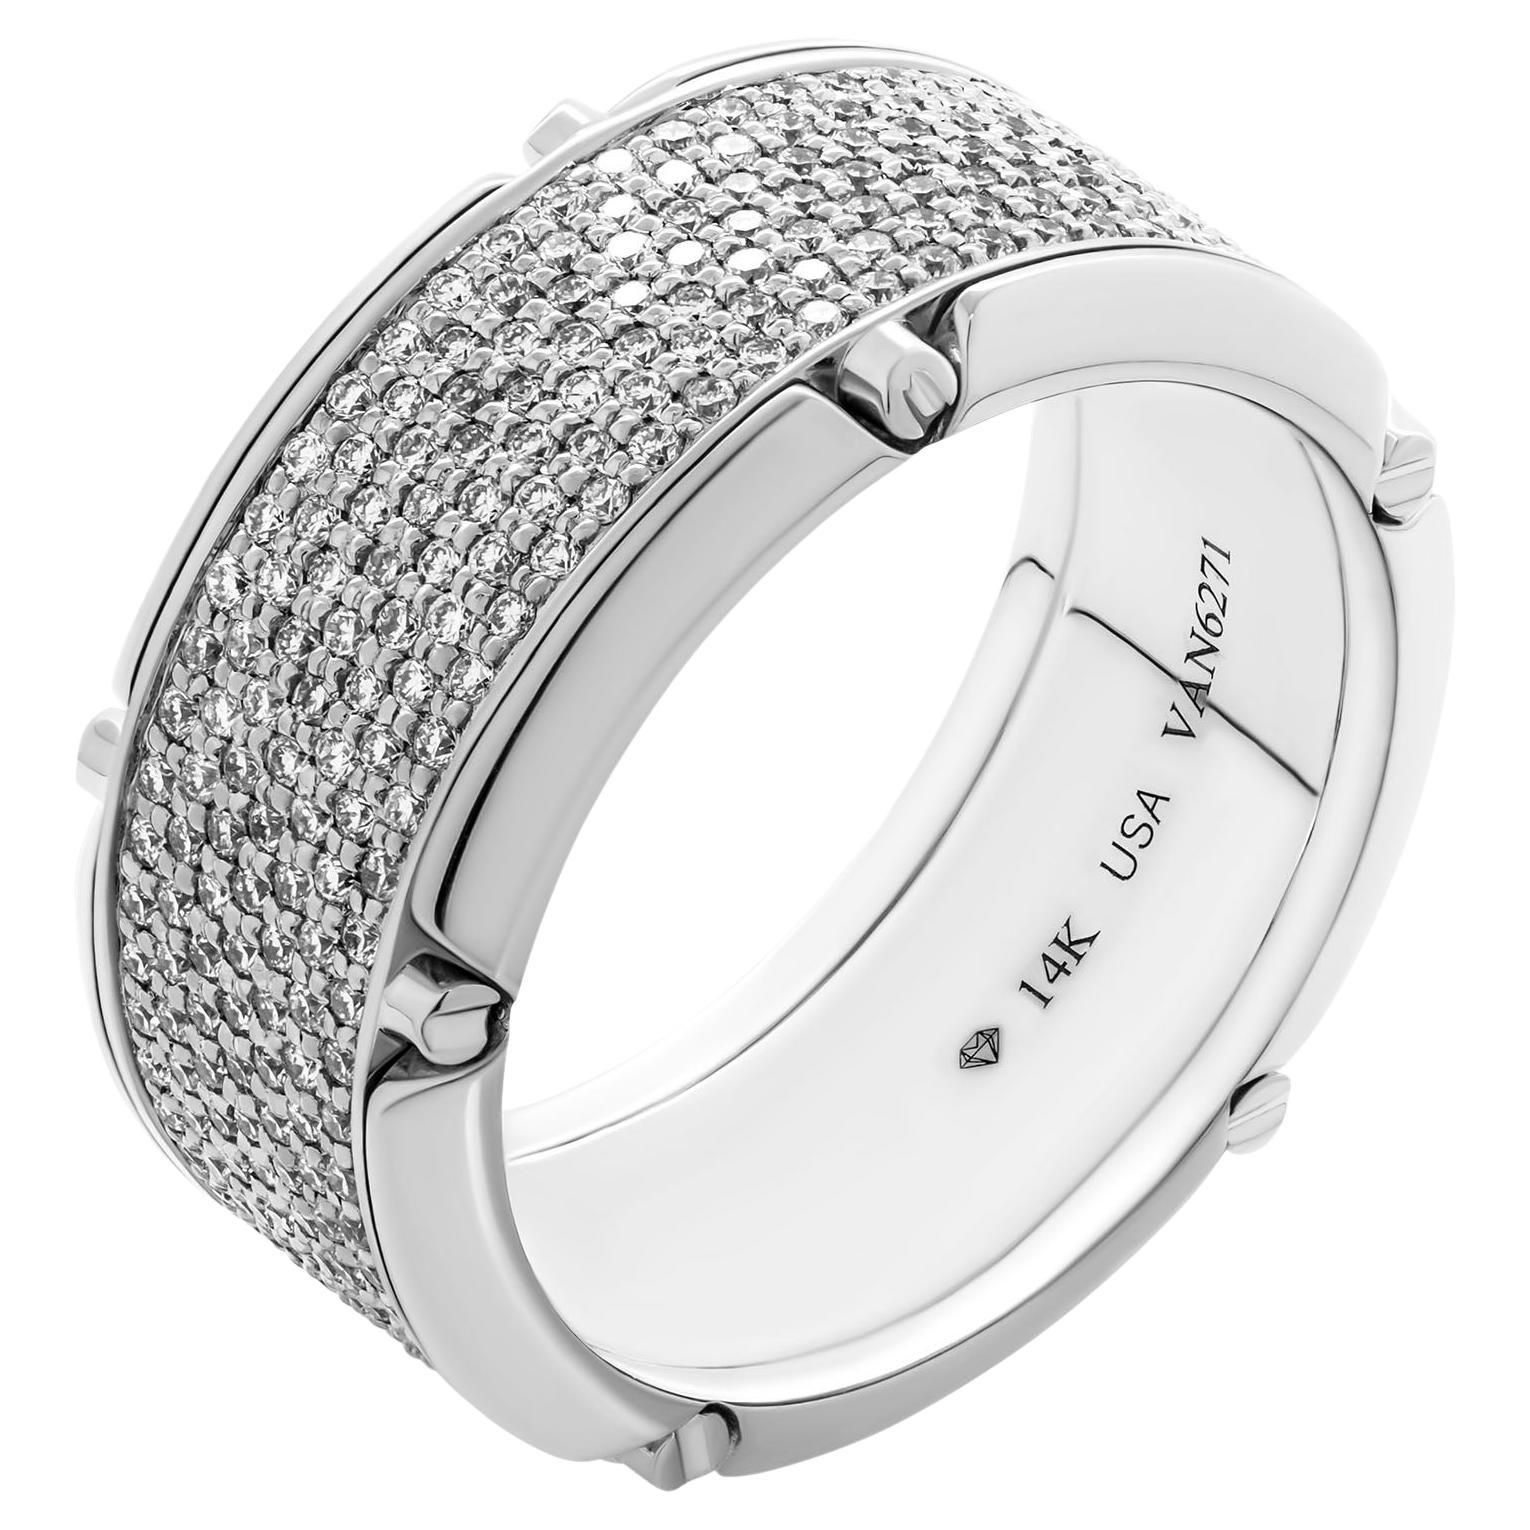 Man`s Pave Wedding Band For Sale